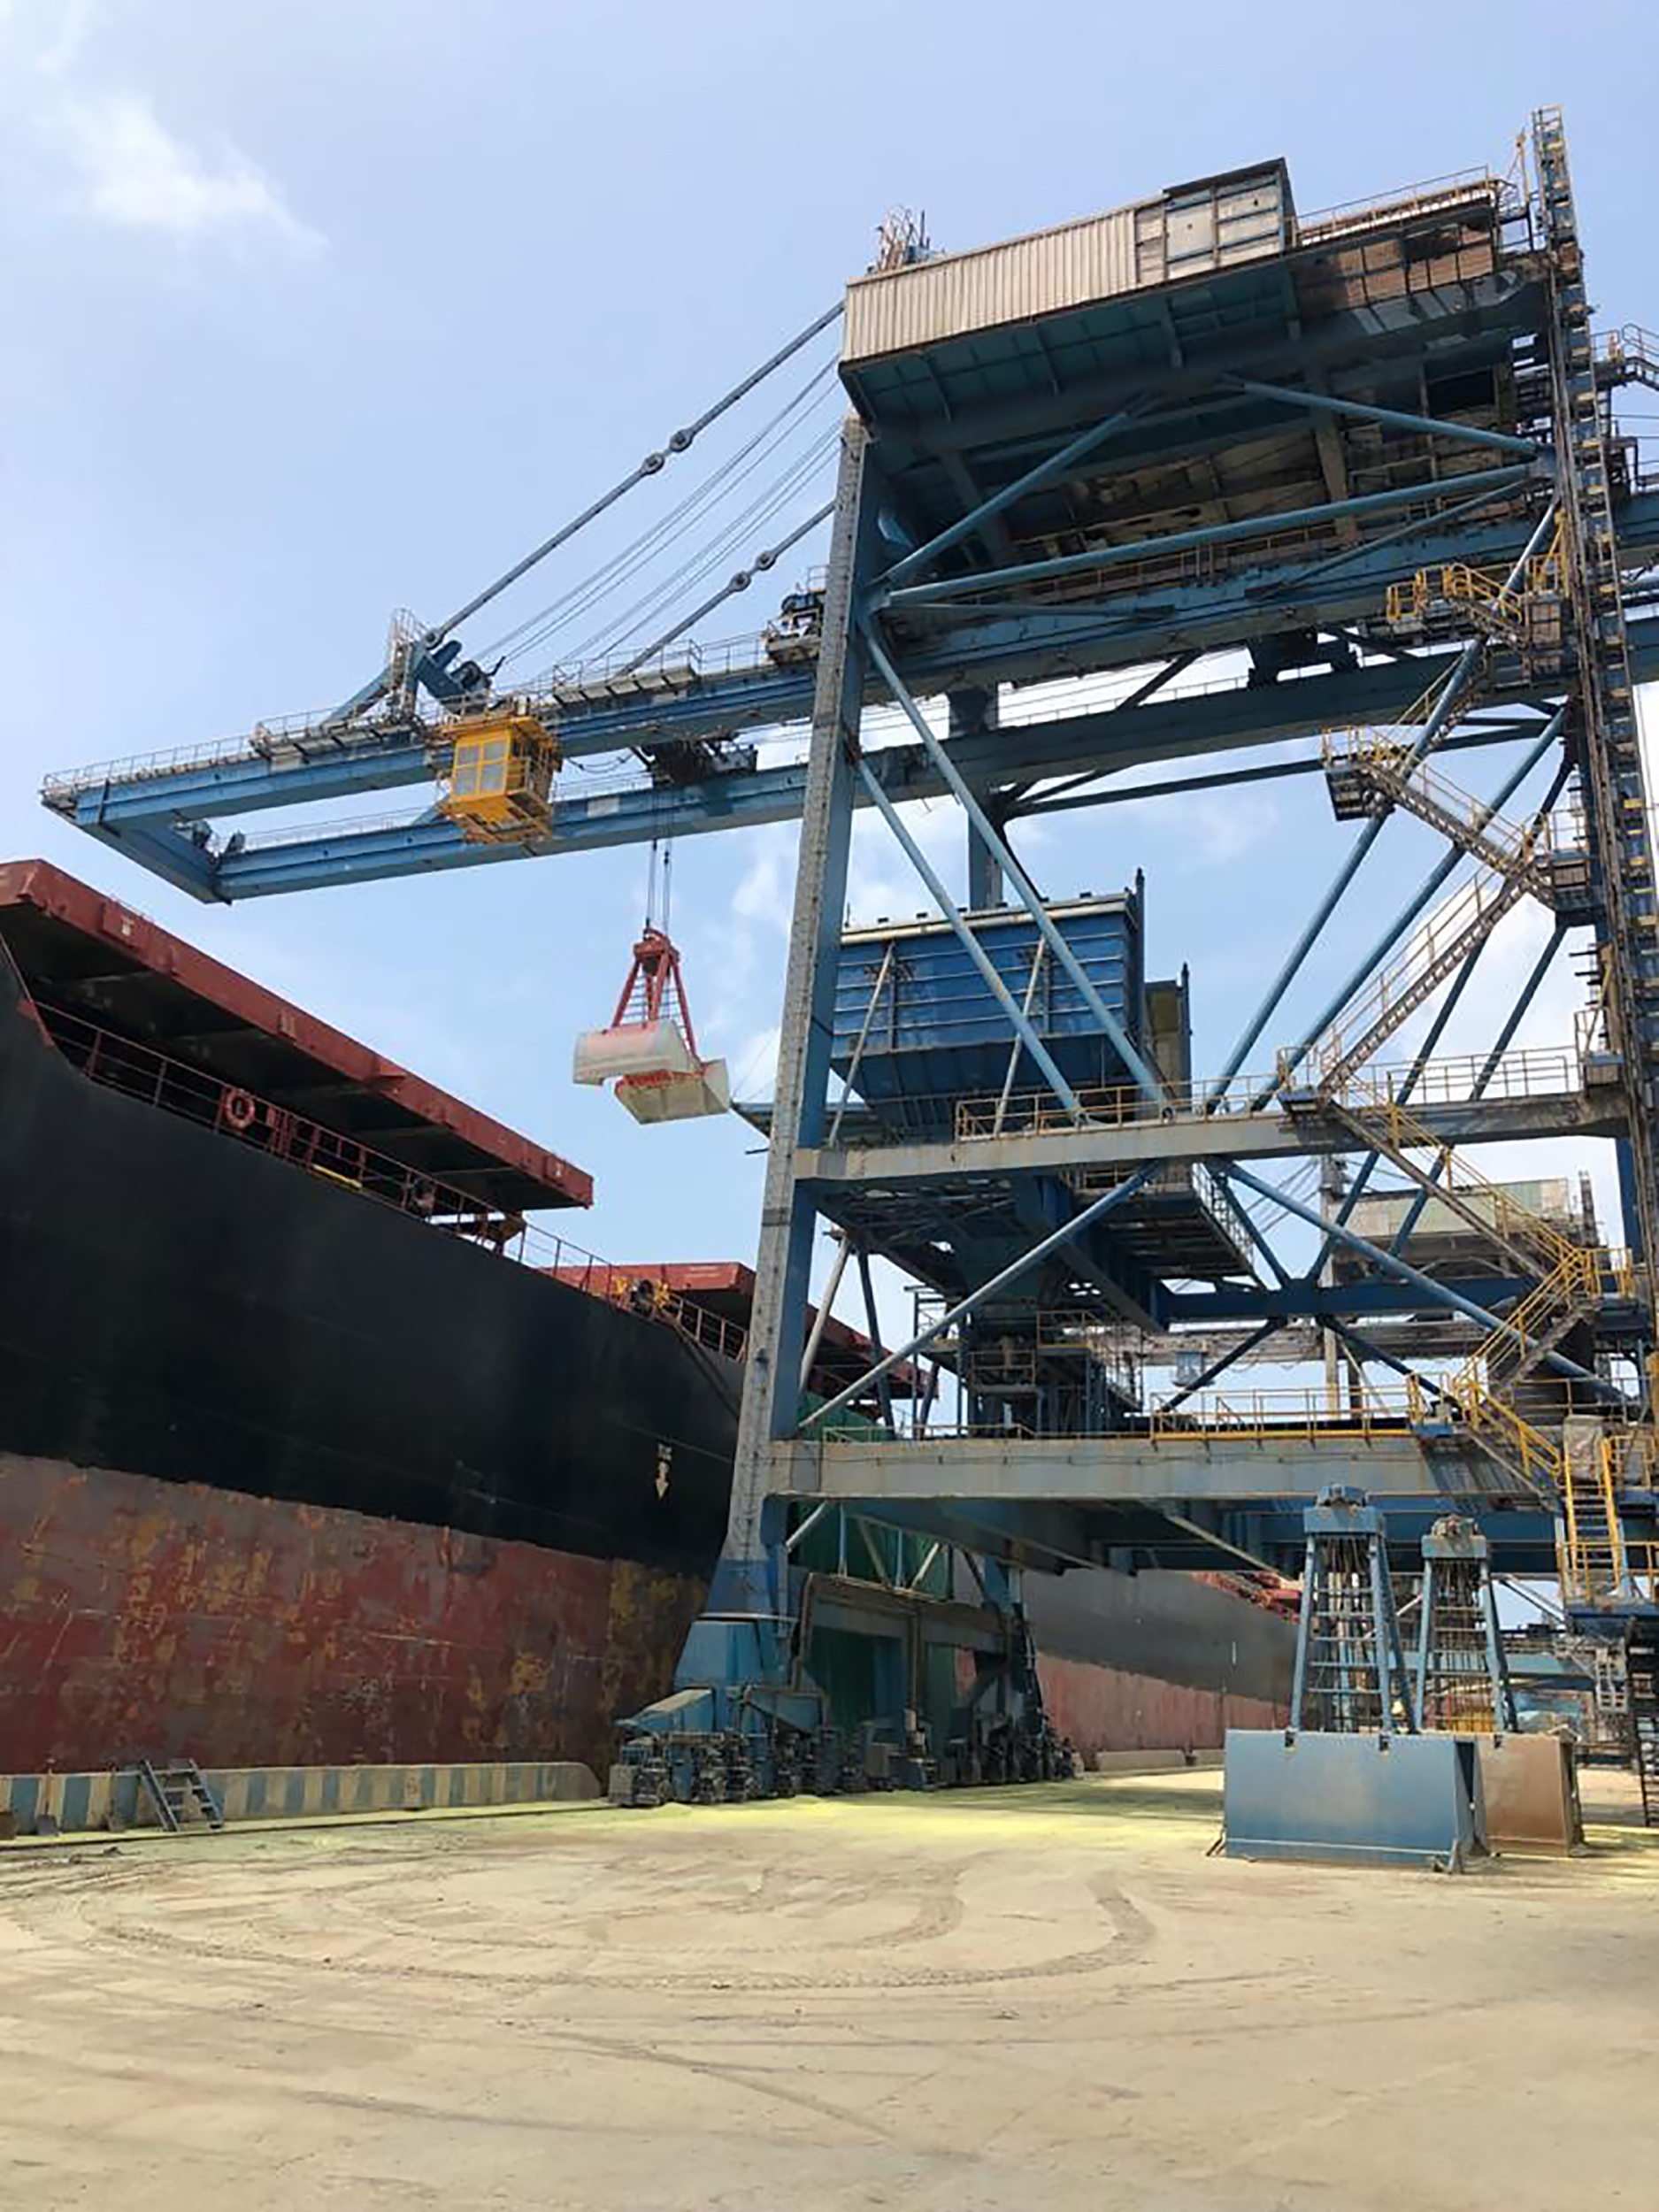 Port cranes have a difficult and demanding job, unloading thousands of tons of goods from ships around the clock. This is particularly true of a TRF Limited grab and loader crane operating at Paradip Port on the East Coast of India.